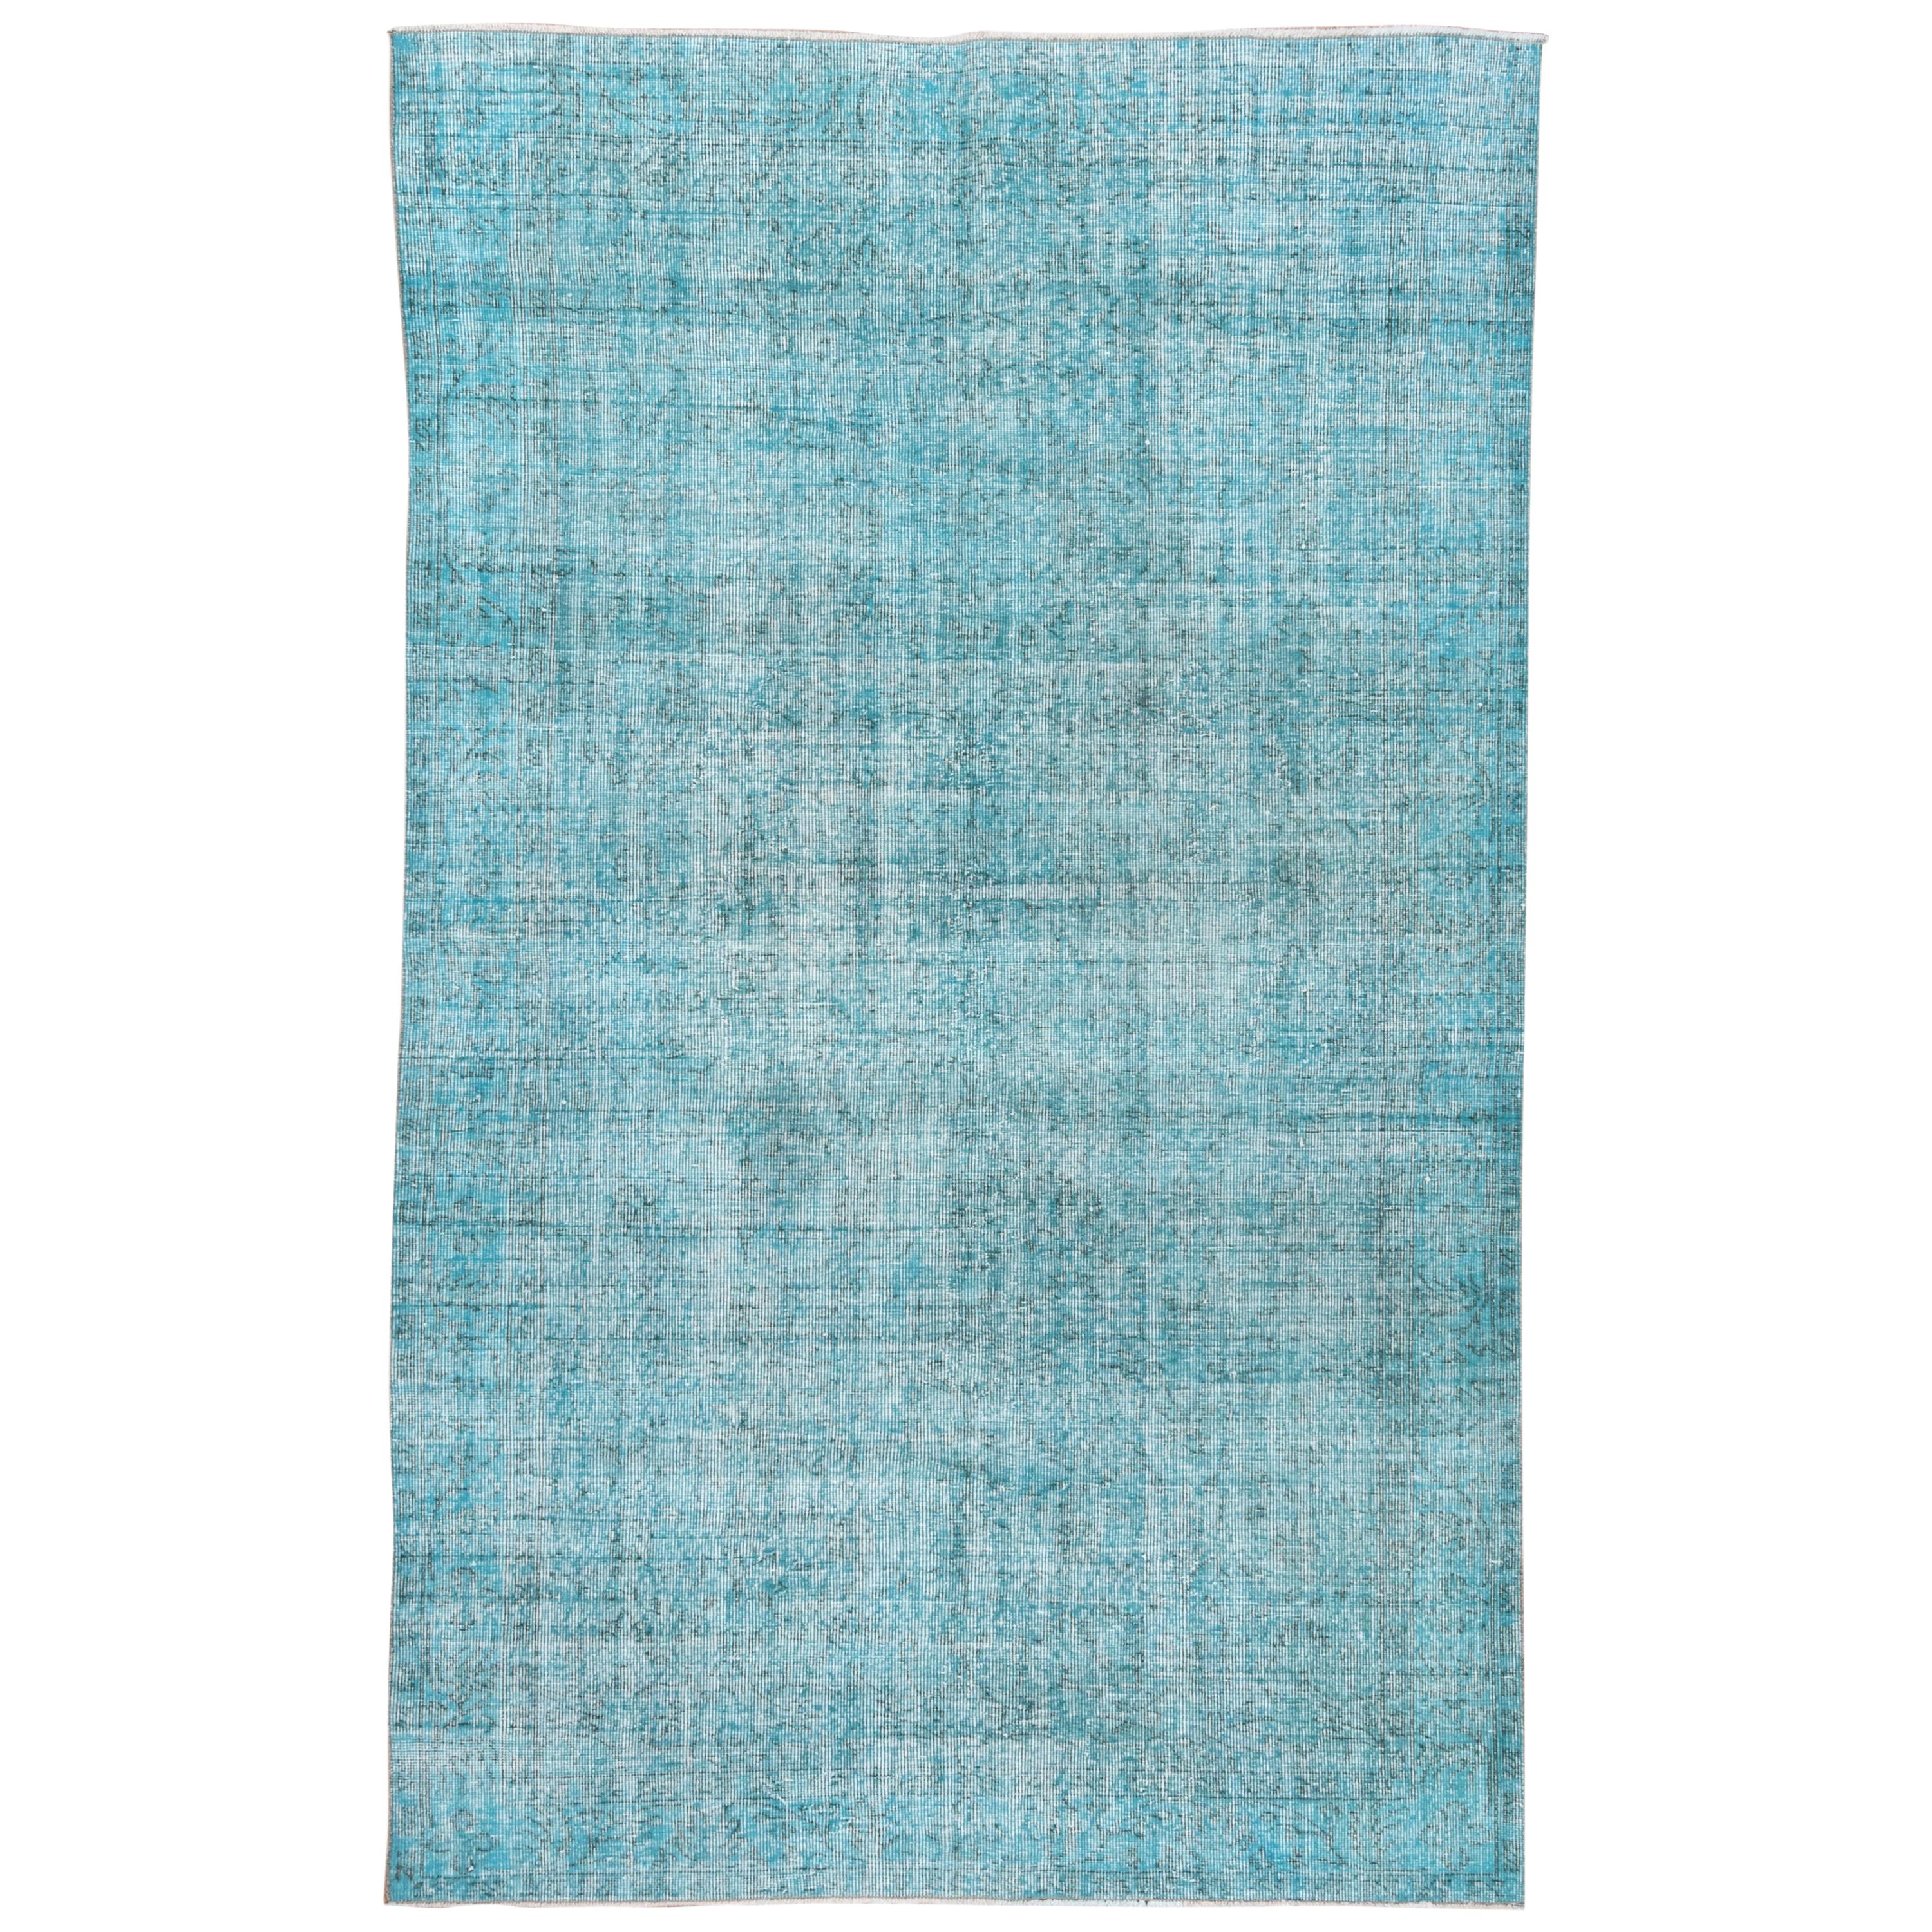 Vintage Bright Turquoise Overdyed Wool Rug